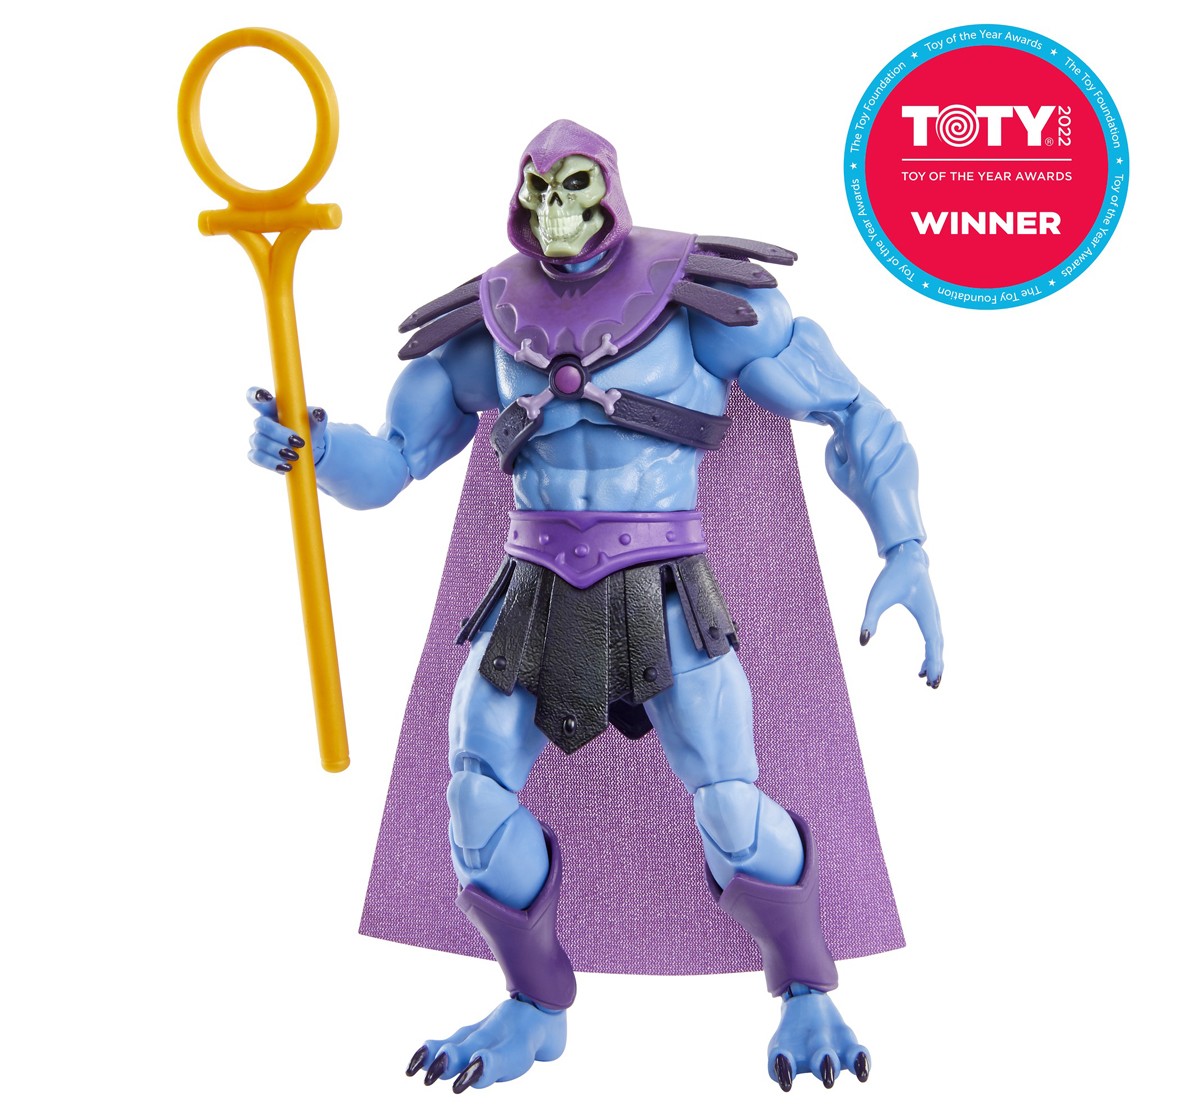 Motu Masters Of The Universe Masterverse Collection, 7-In Battle Figure - Skeletor For Storytelling Play And Display, 6Y+, Multicolour